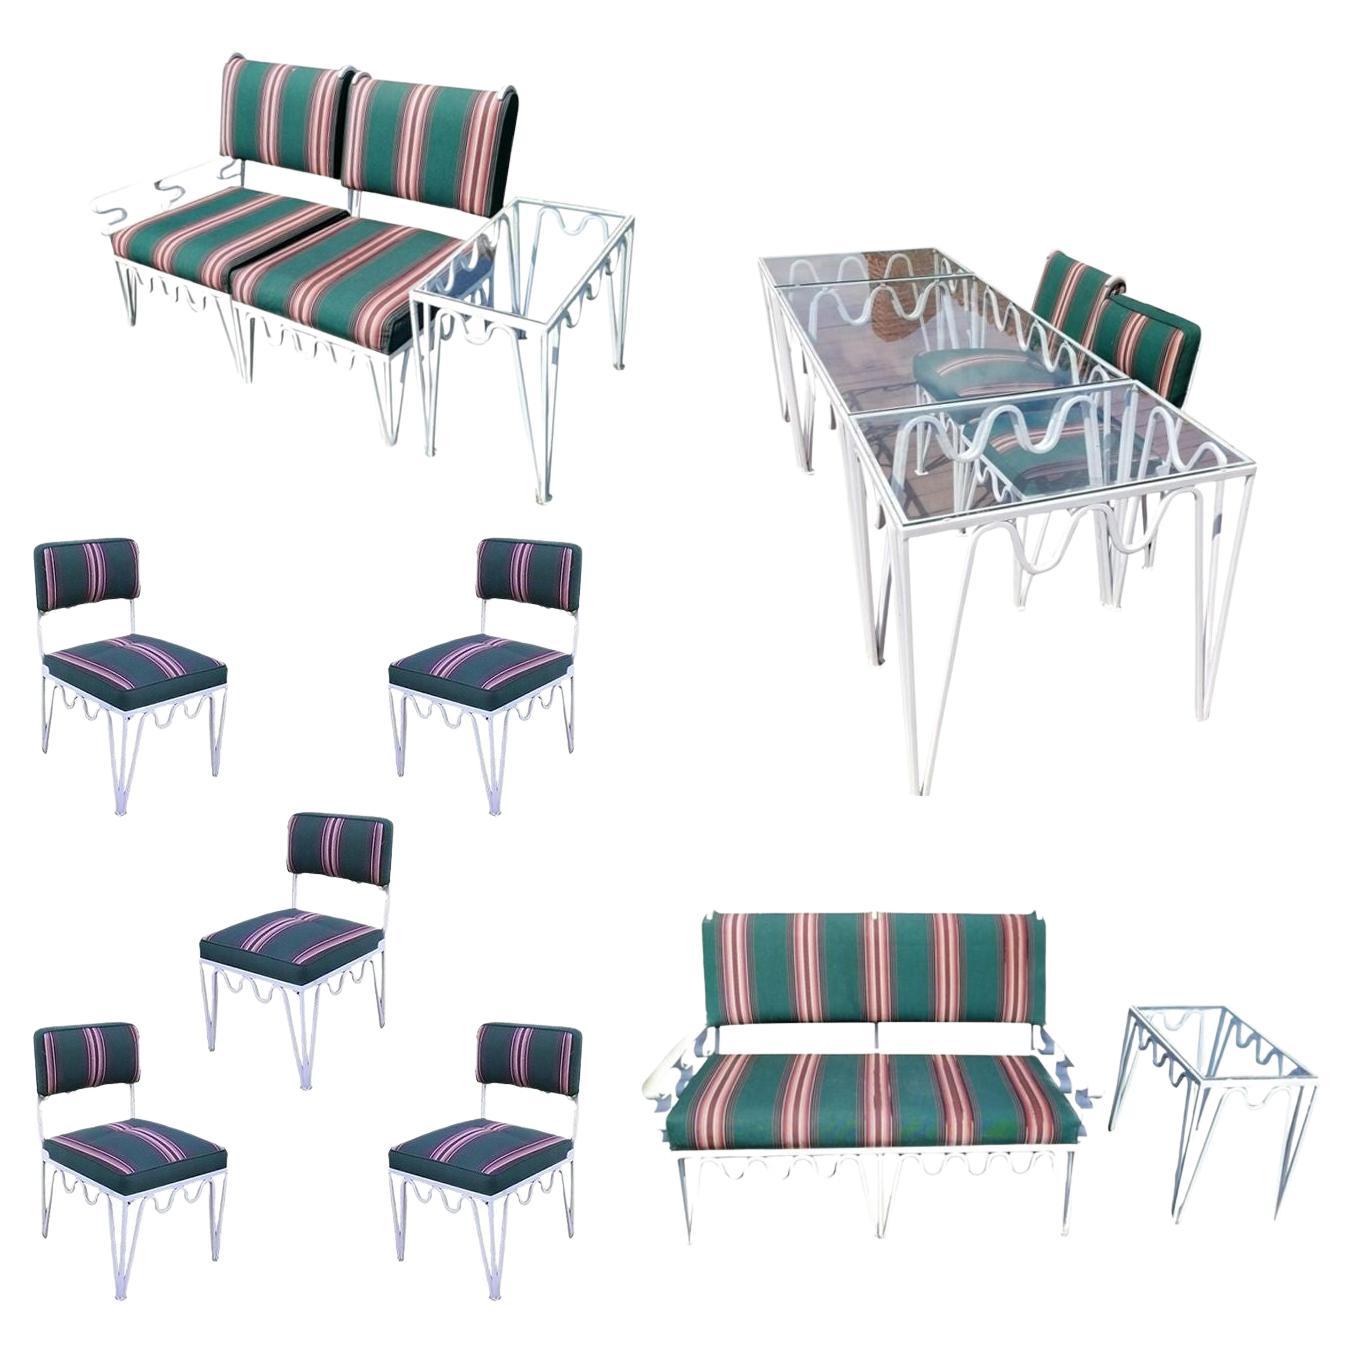 Restored Rare 14 Piece Méandre Outdoor Patio Set by Walter Lamb for Pacific Iron